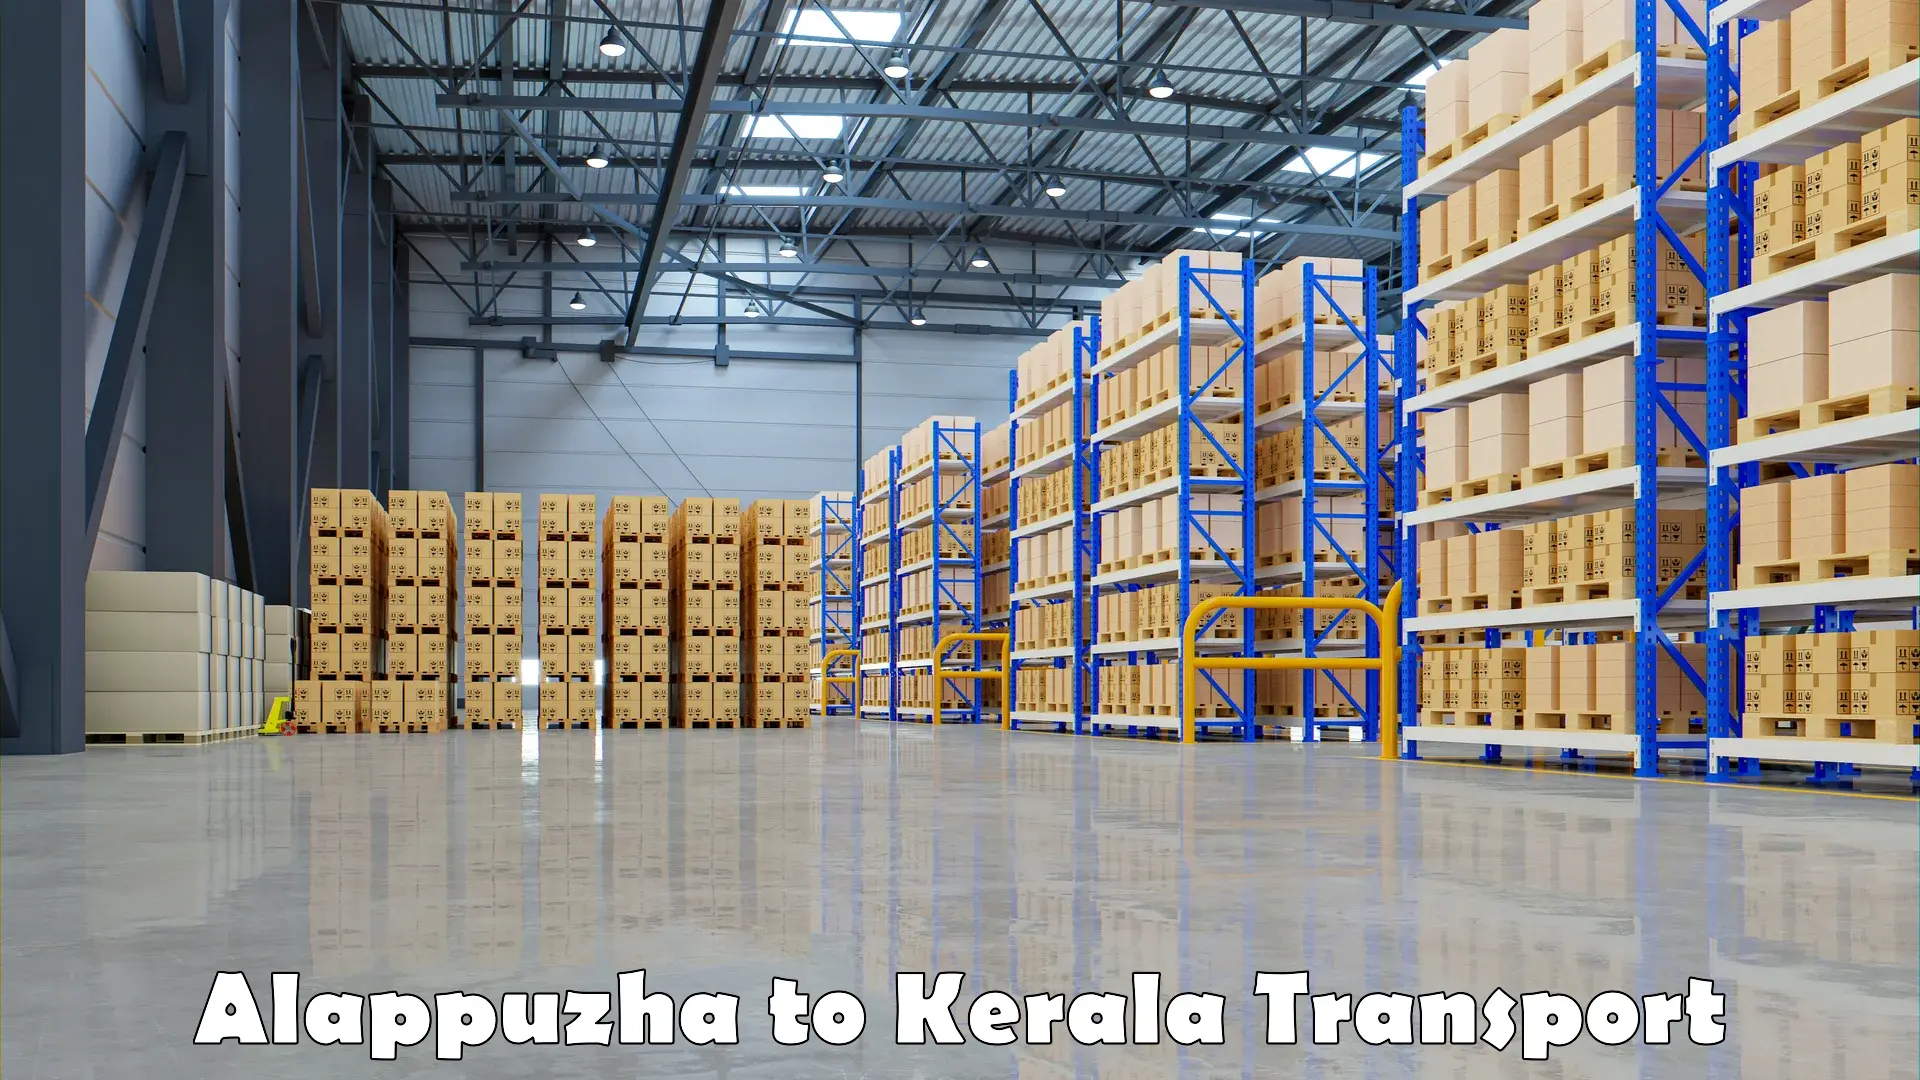 Delivery service Alappuzha to Kerala